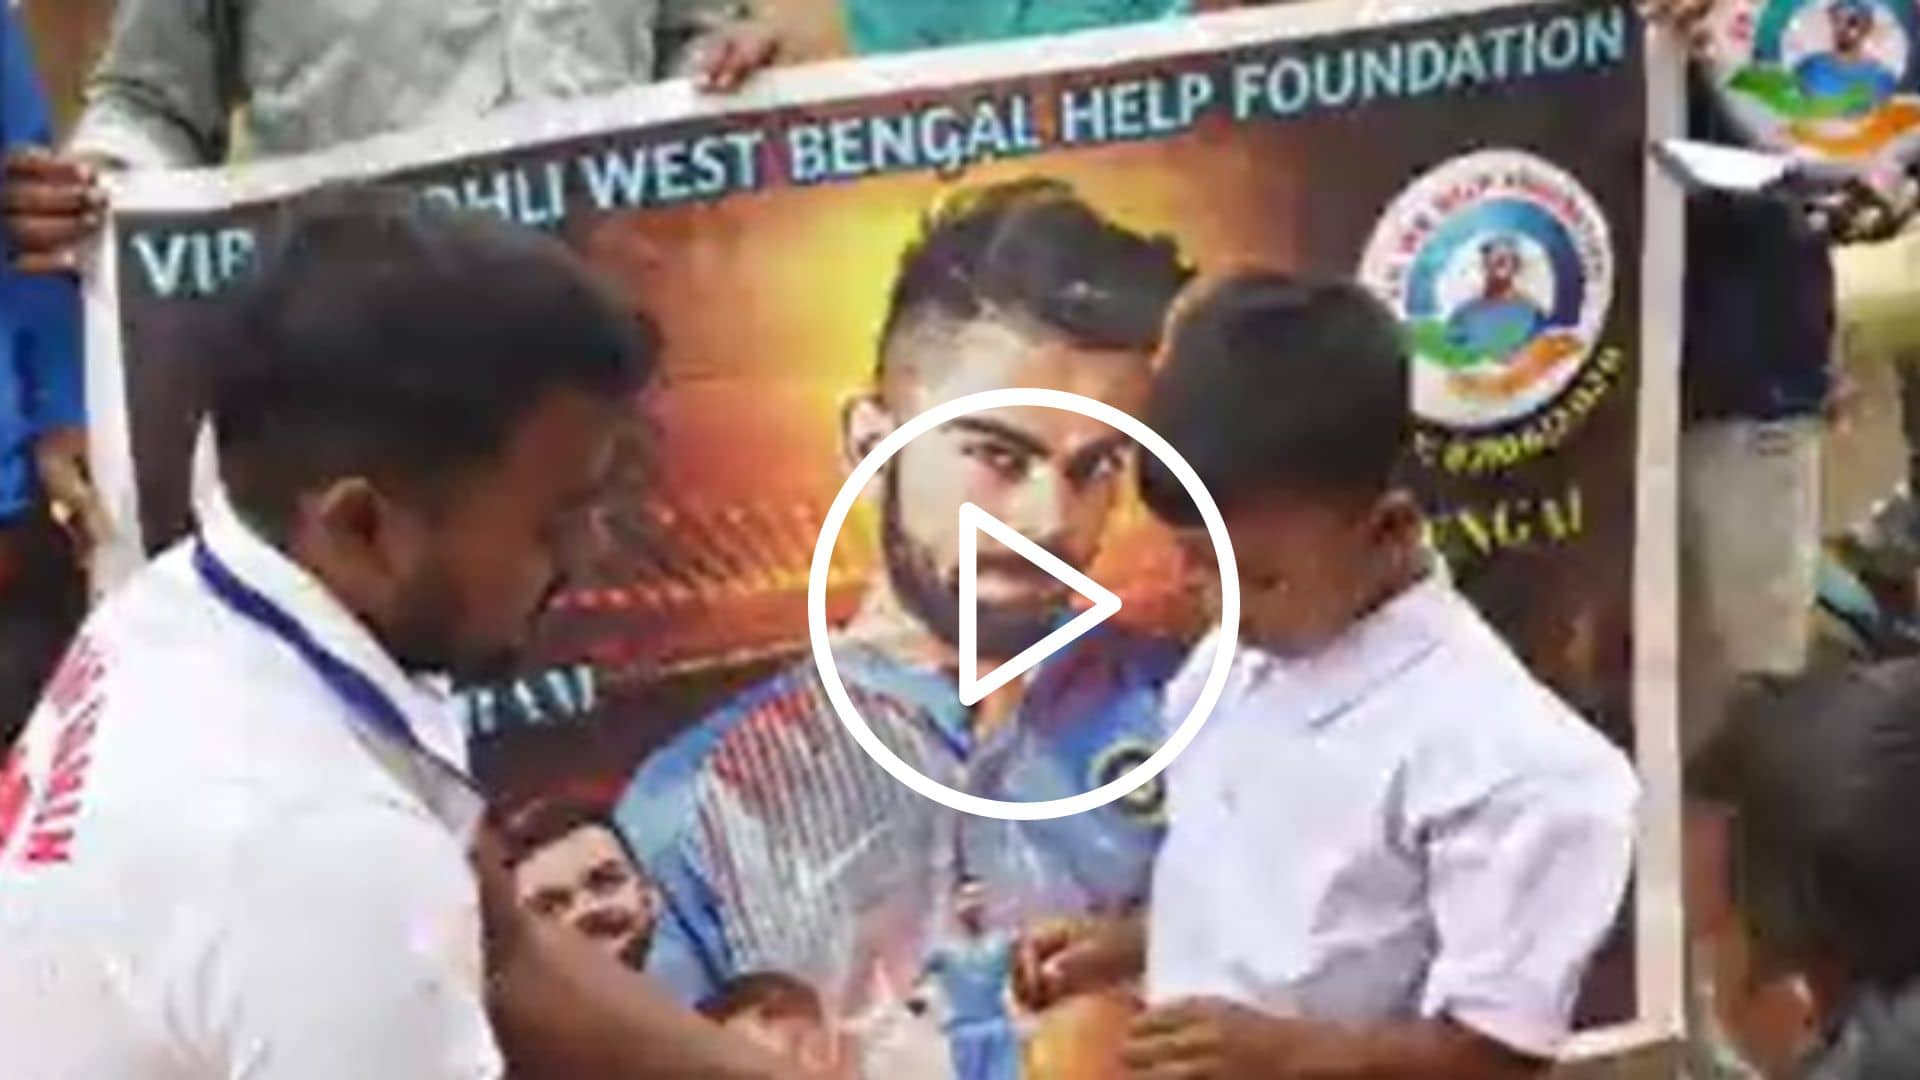 [Watch] Virat Kohli Fans Distribute Clothes To Needy Children In West Bengal